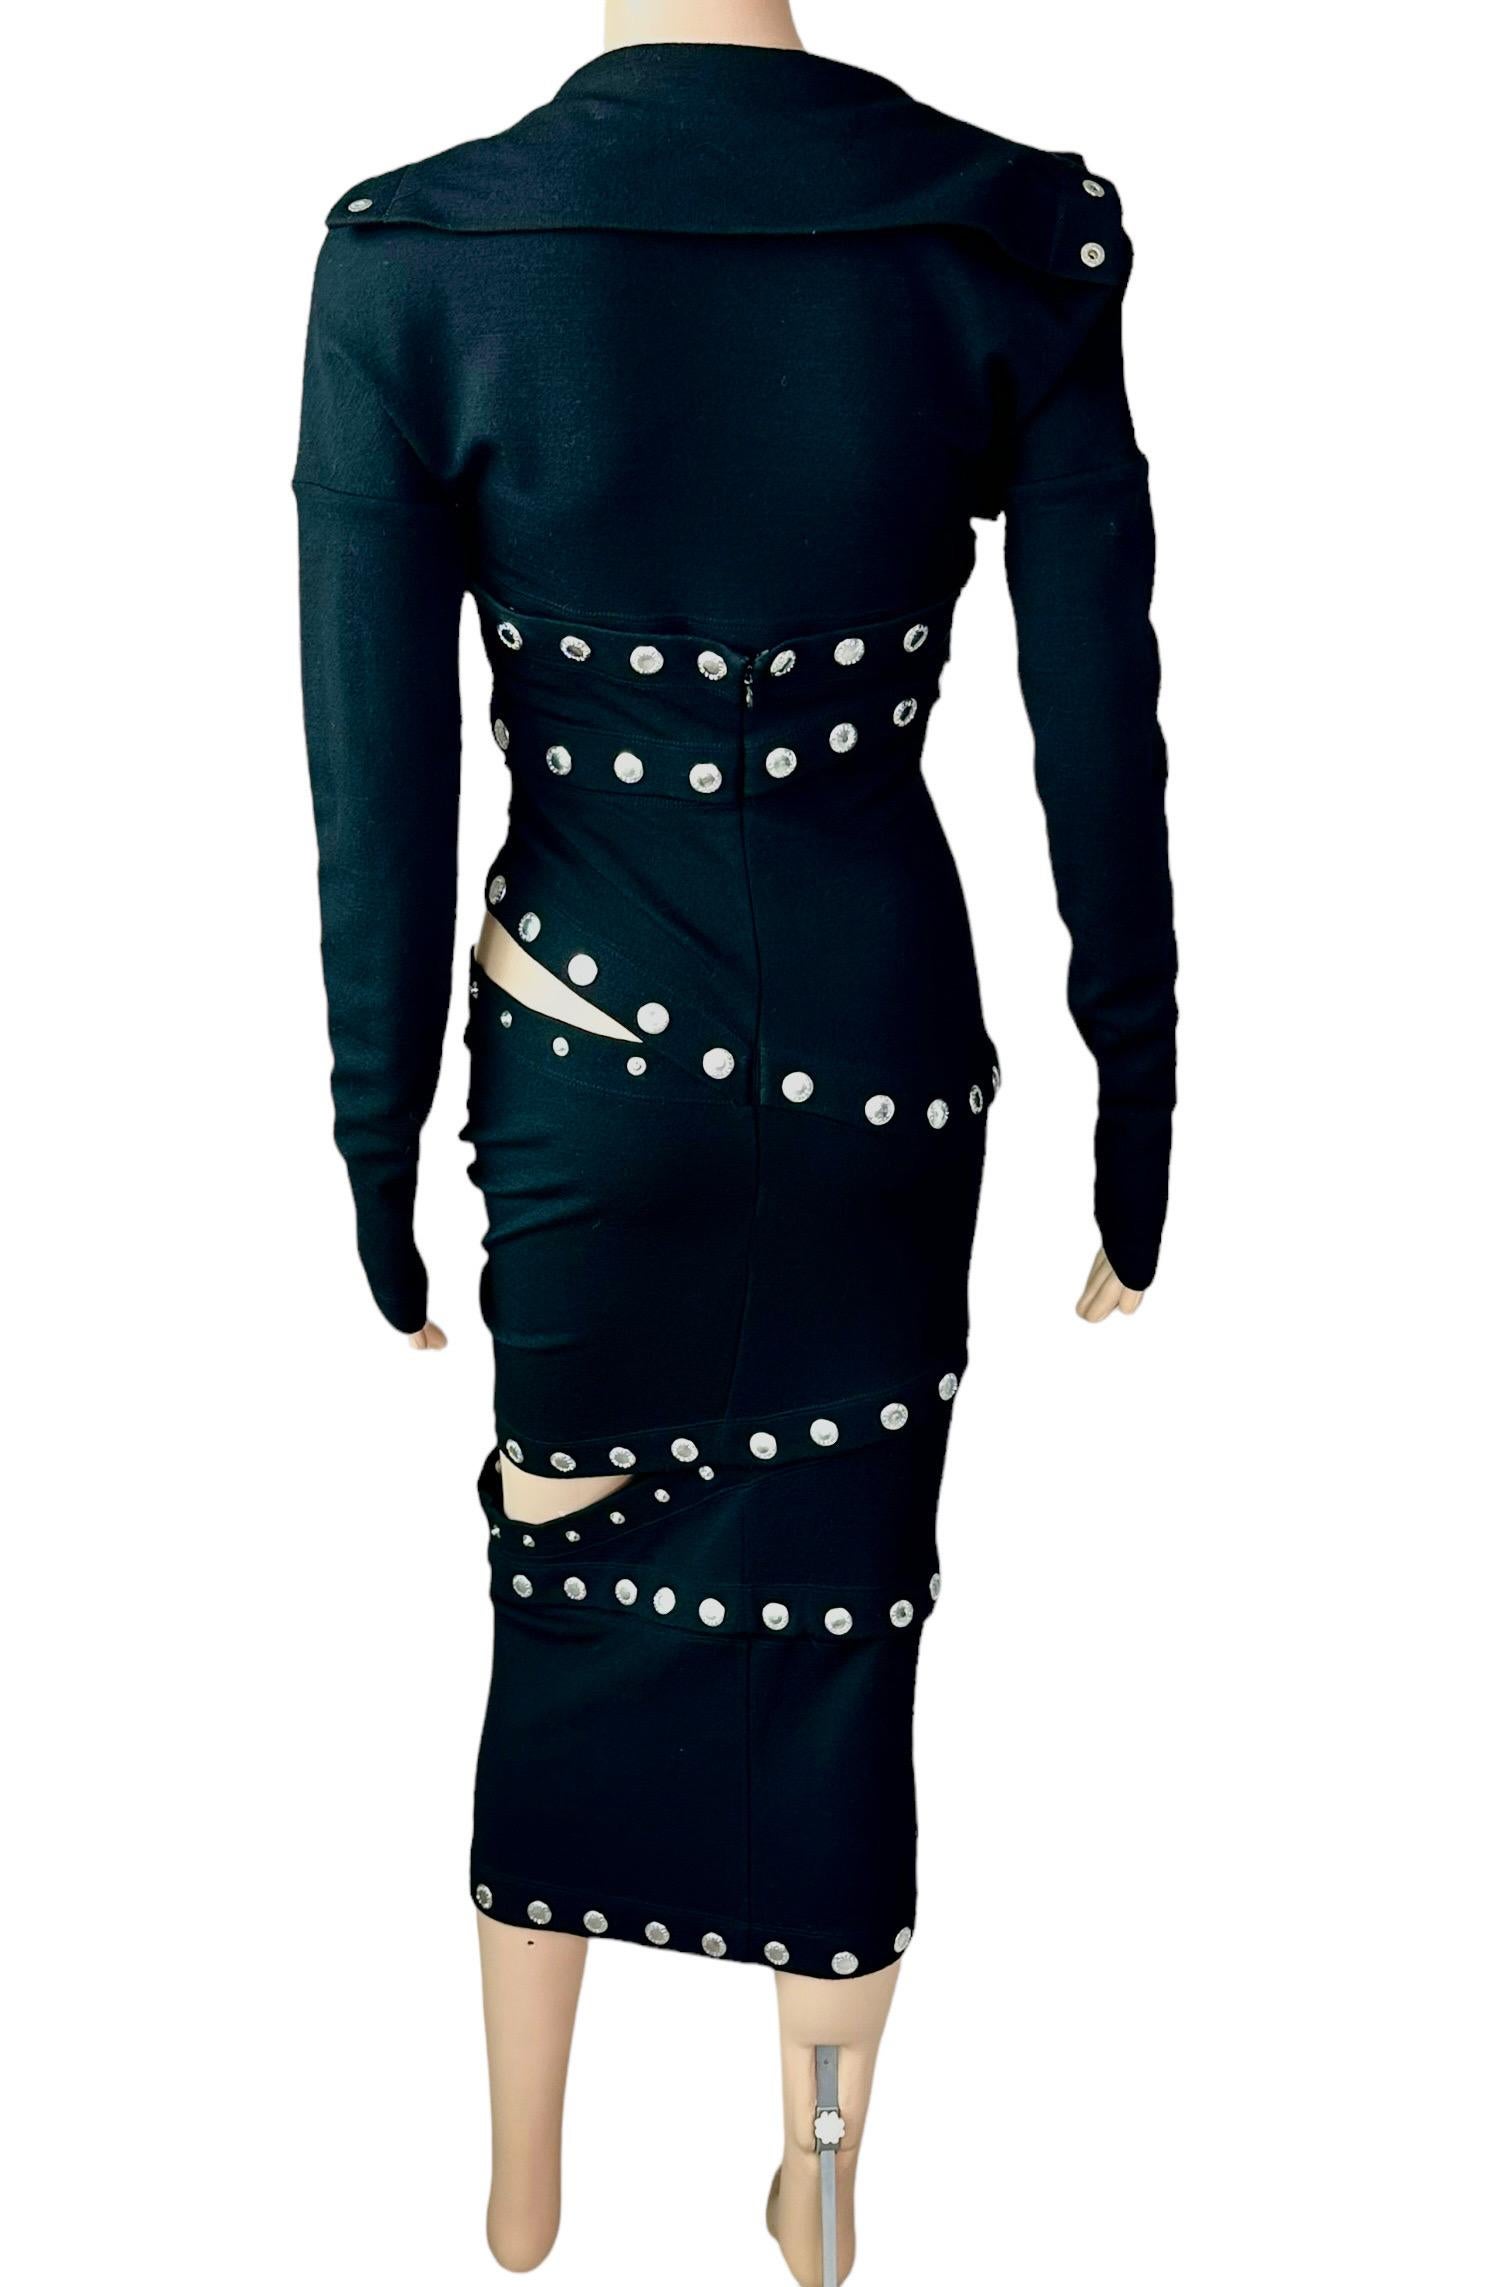 Dolce & Gabbana F/W 2003 Runway Cutout Snap-Up Convertible Knit Black Dress In Good Condition For Sale In Naples, FL